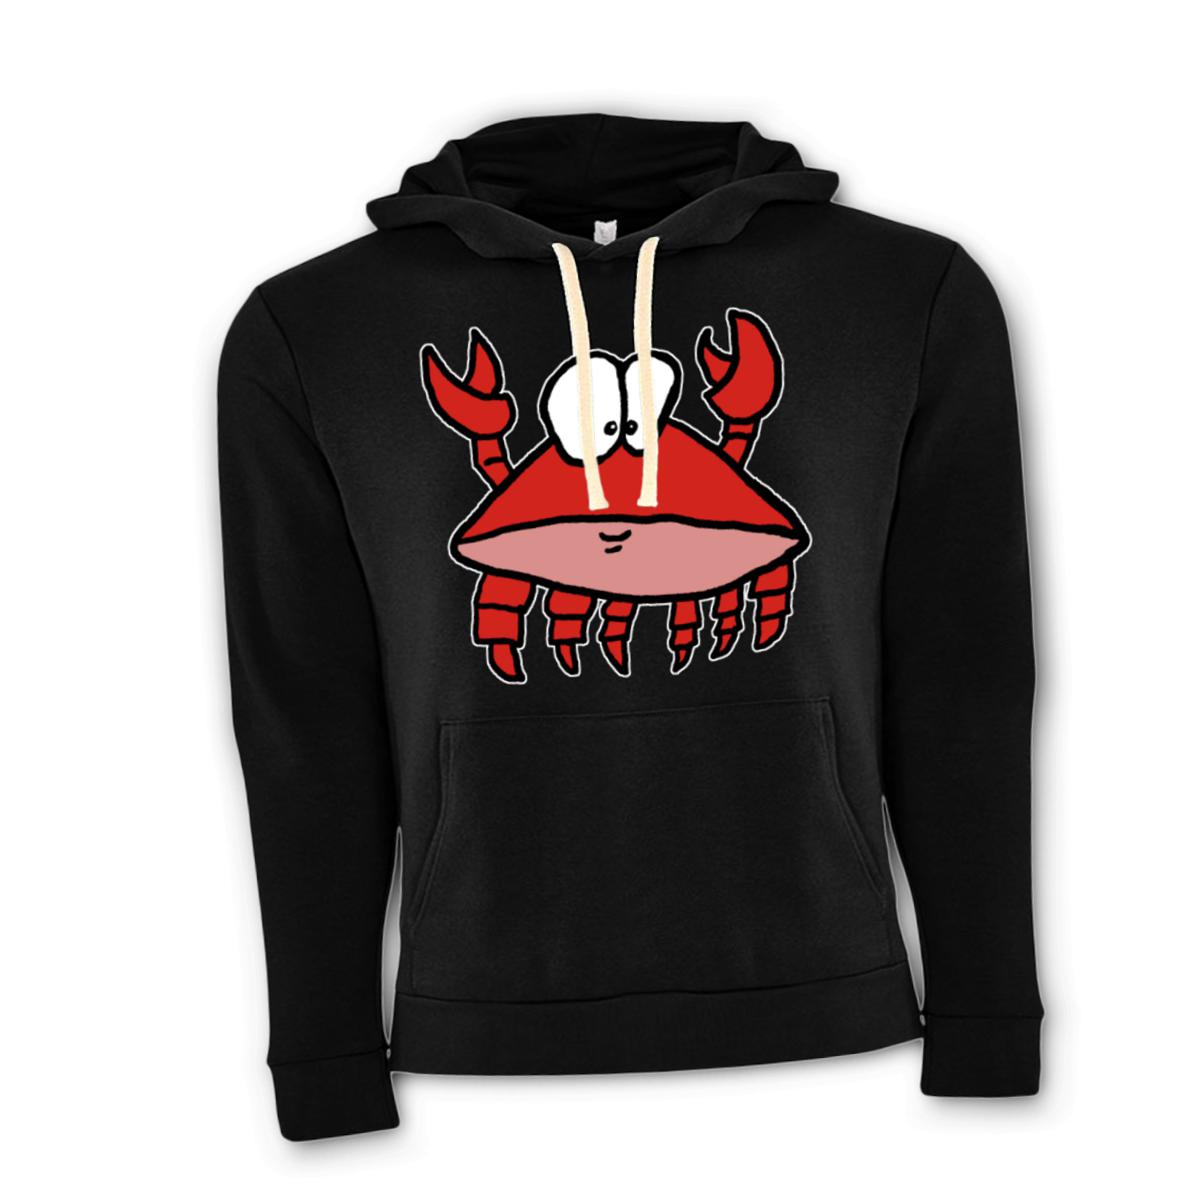 Crab 2.0 Unisex Pullover Hoodie Small black